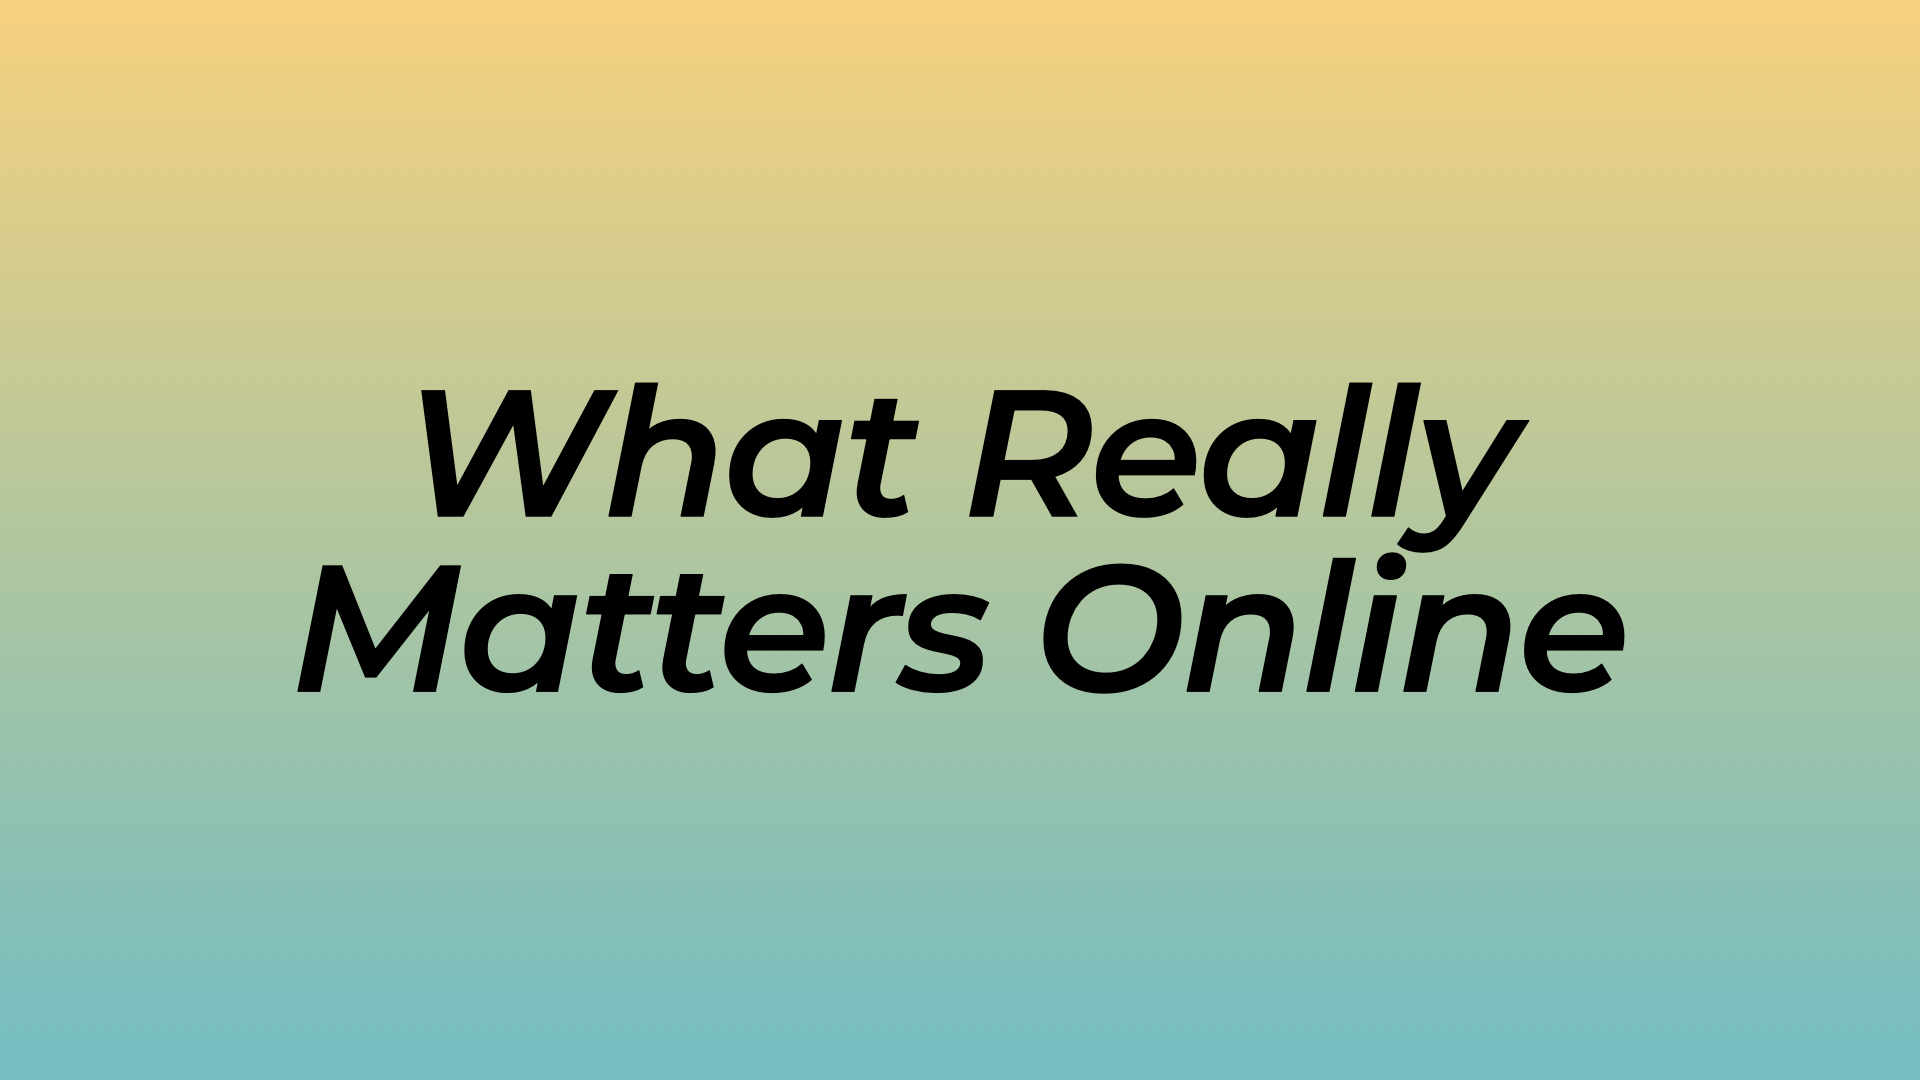 What Really Matters Online